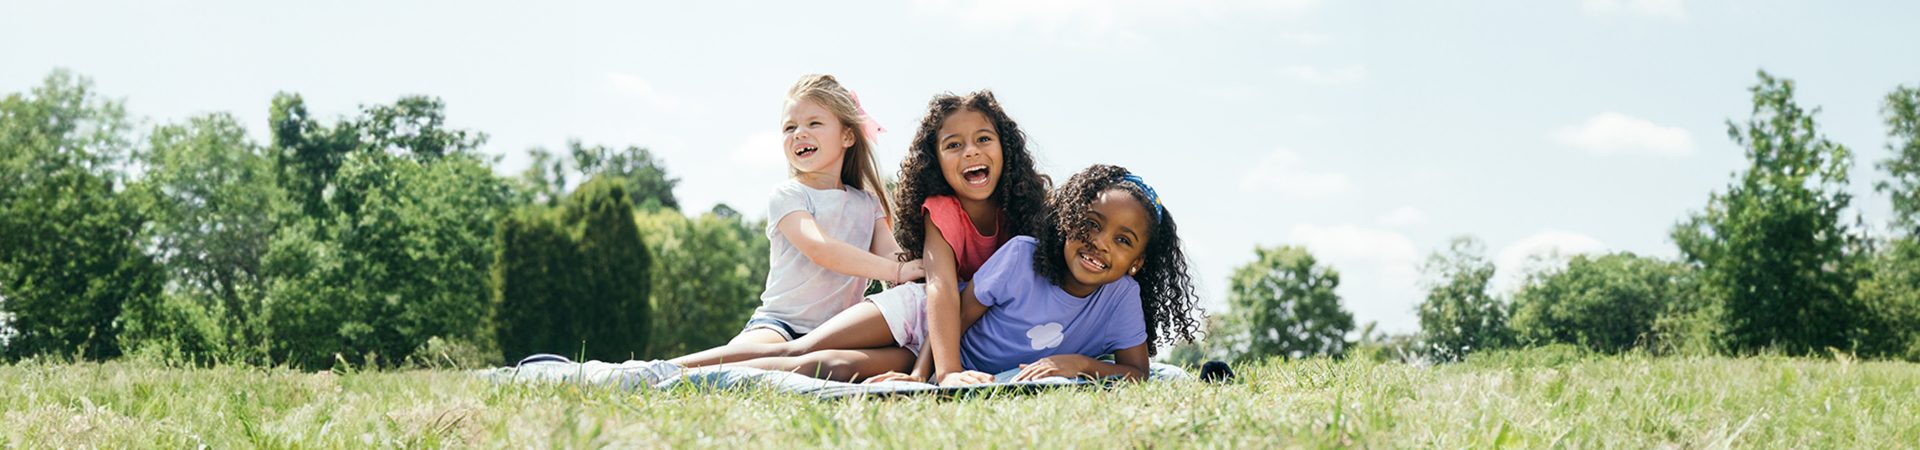  Three young Girl Scouts playing in the grass 